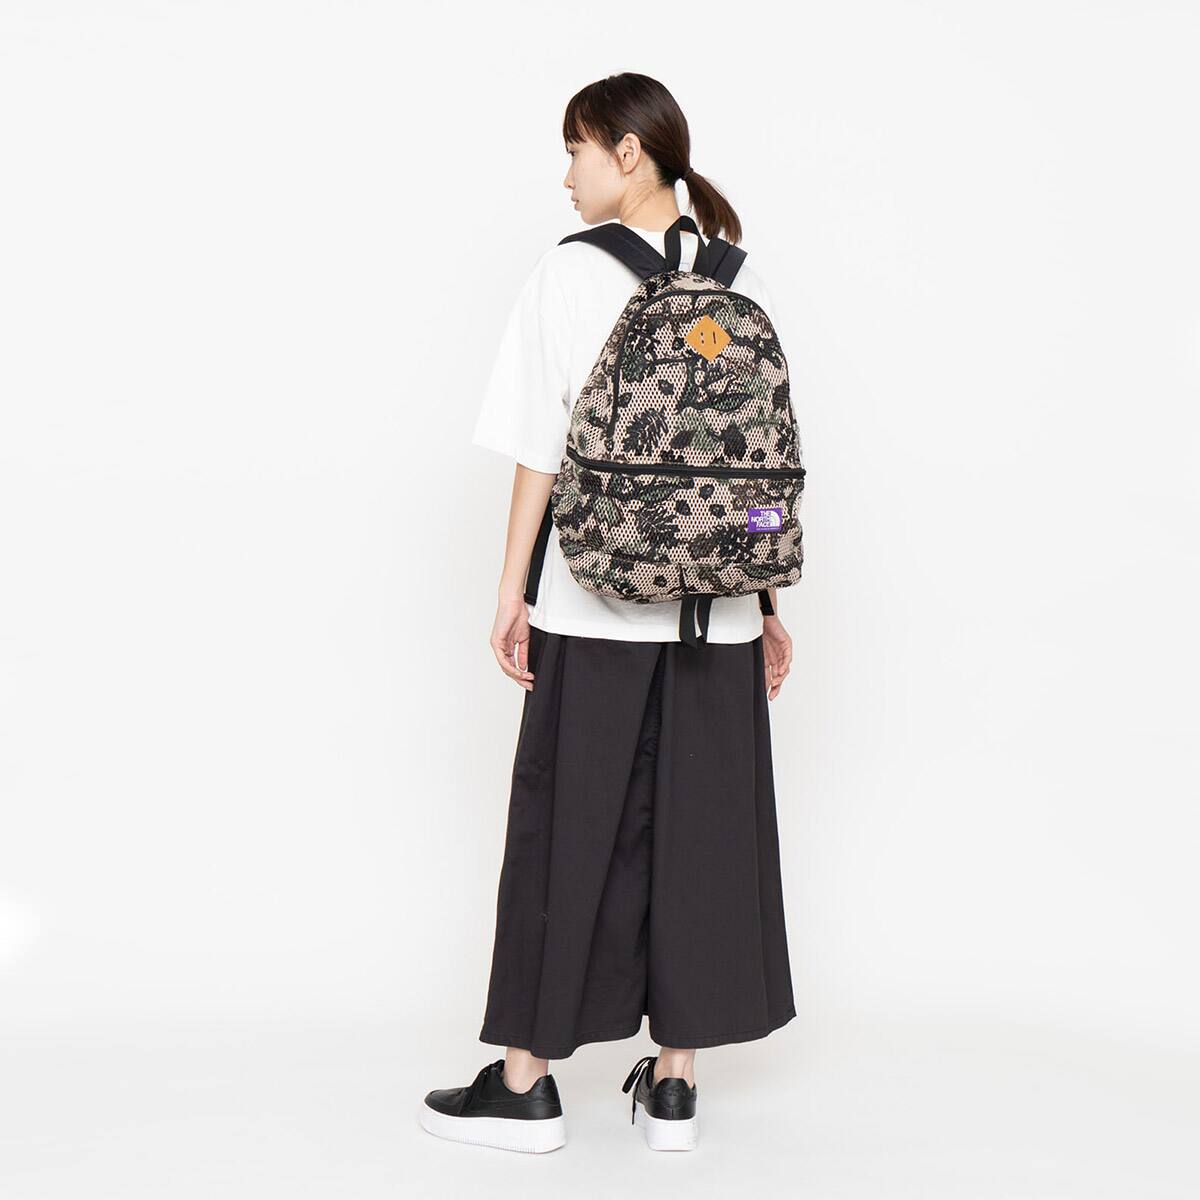 PC/タブレット デスクトップ型PC THE NORTH FACE PURPLE LABEL Botanical Print Mesh Day Pack BEIGE 22SS-I